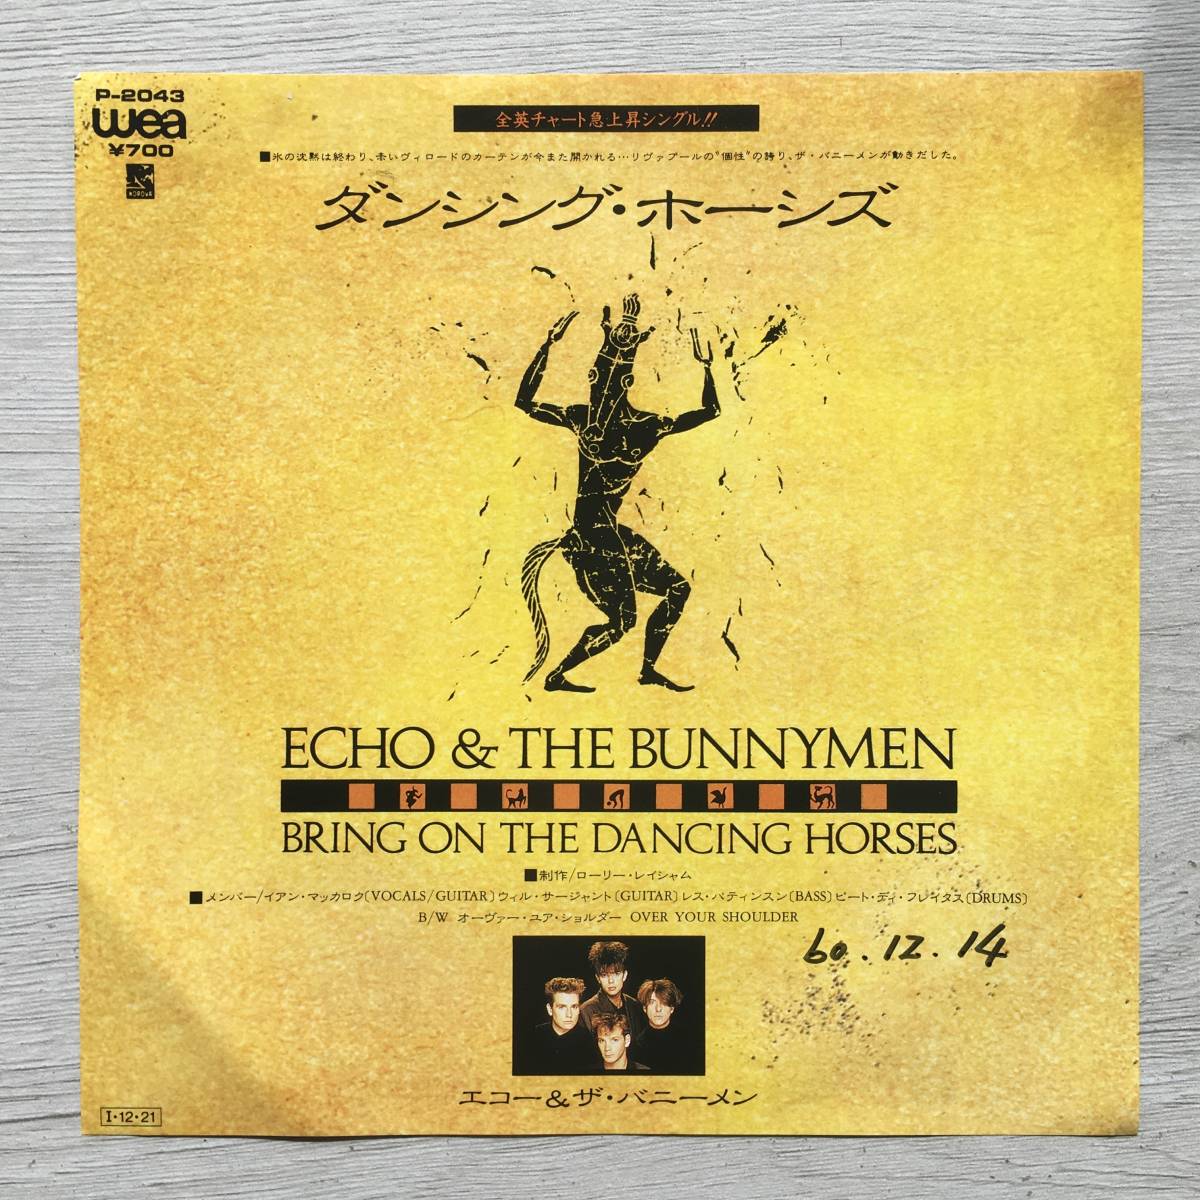 PROMO ECHO & THE BUNNYMEN BRING ON THE DANCING HORSE